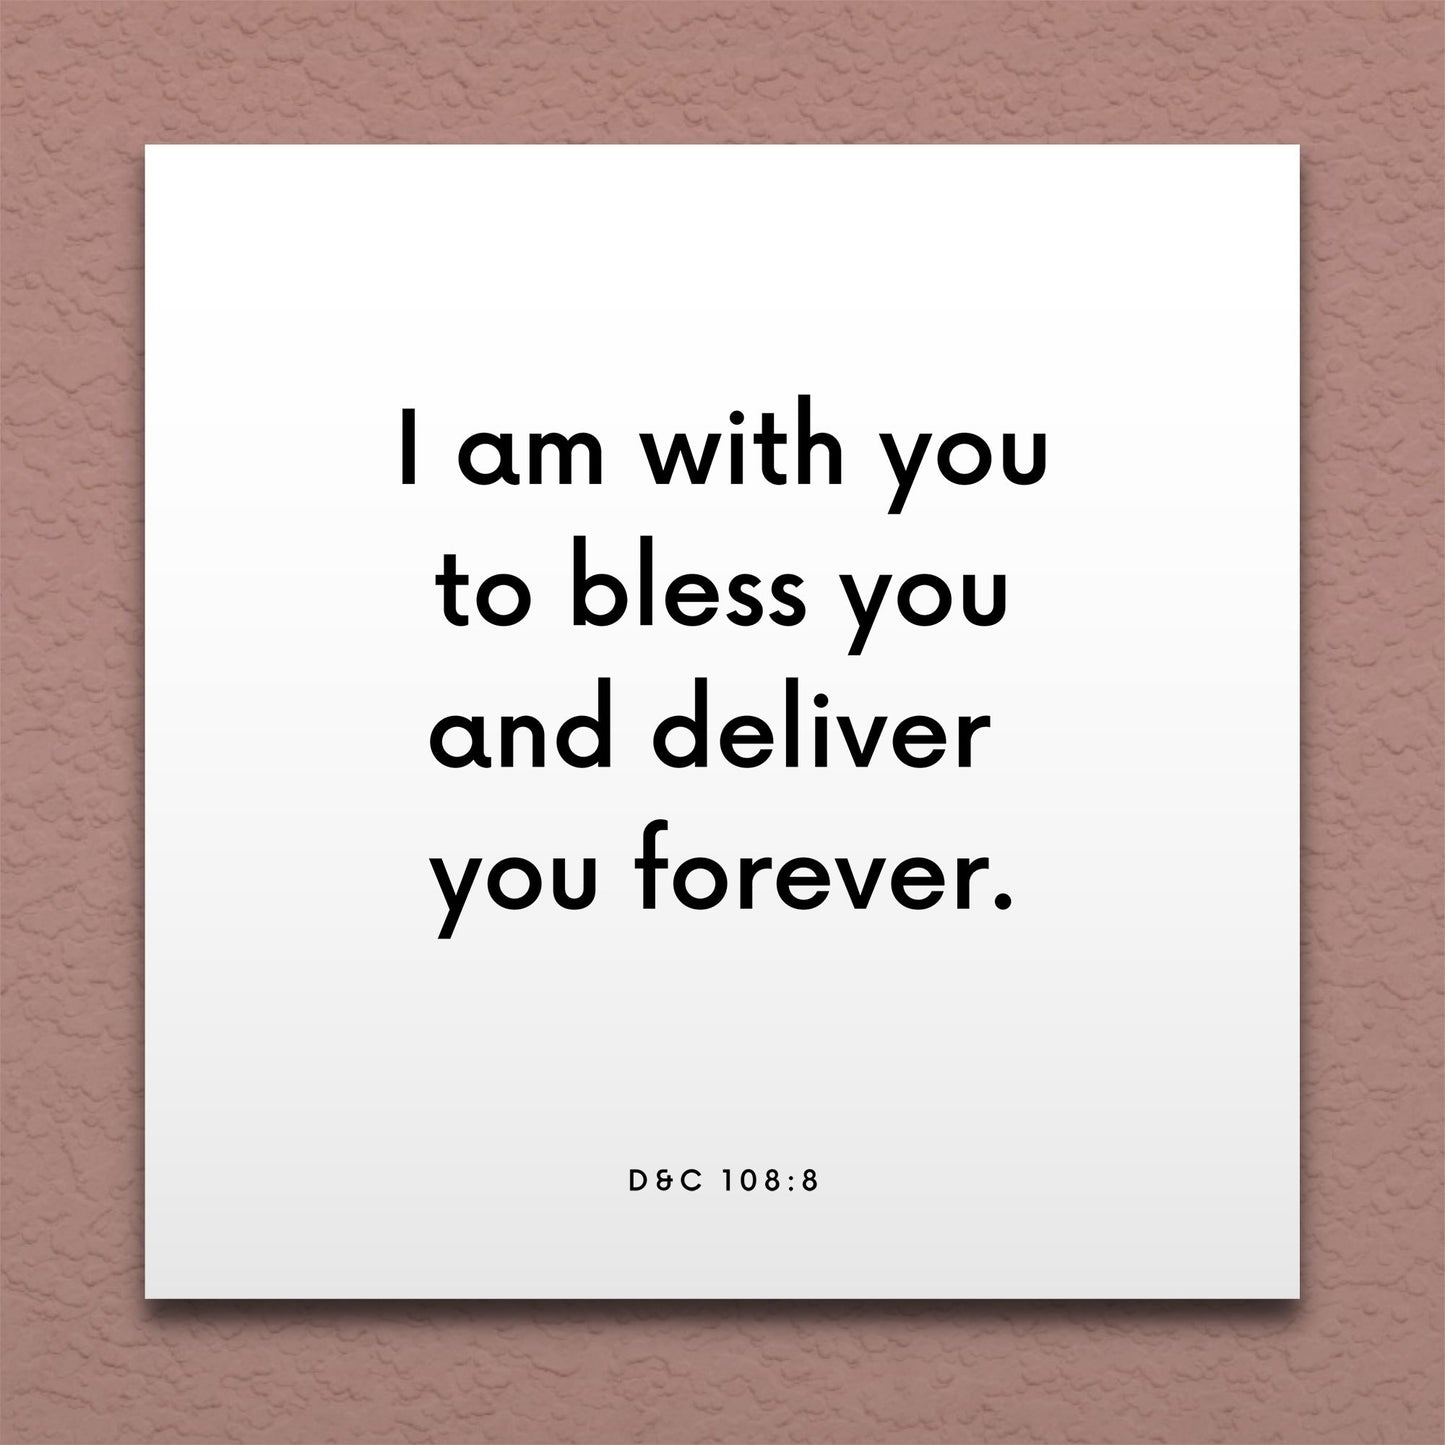 Wall-mounted scripture tile for D&C 108:8 - "I am with you to bless you and deliver you forever"